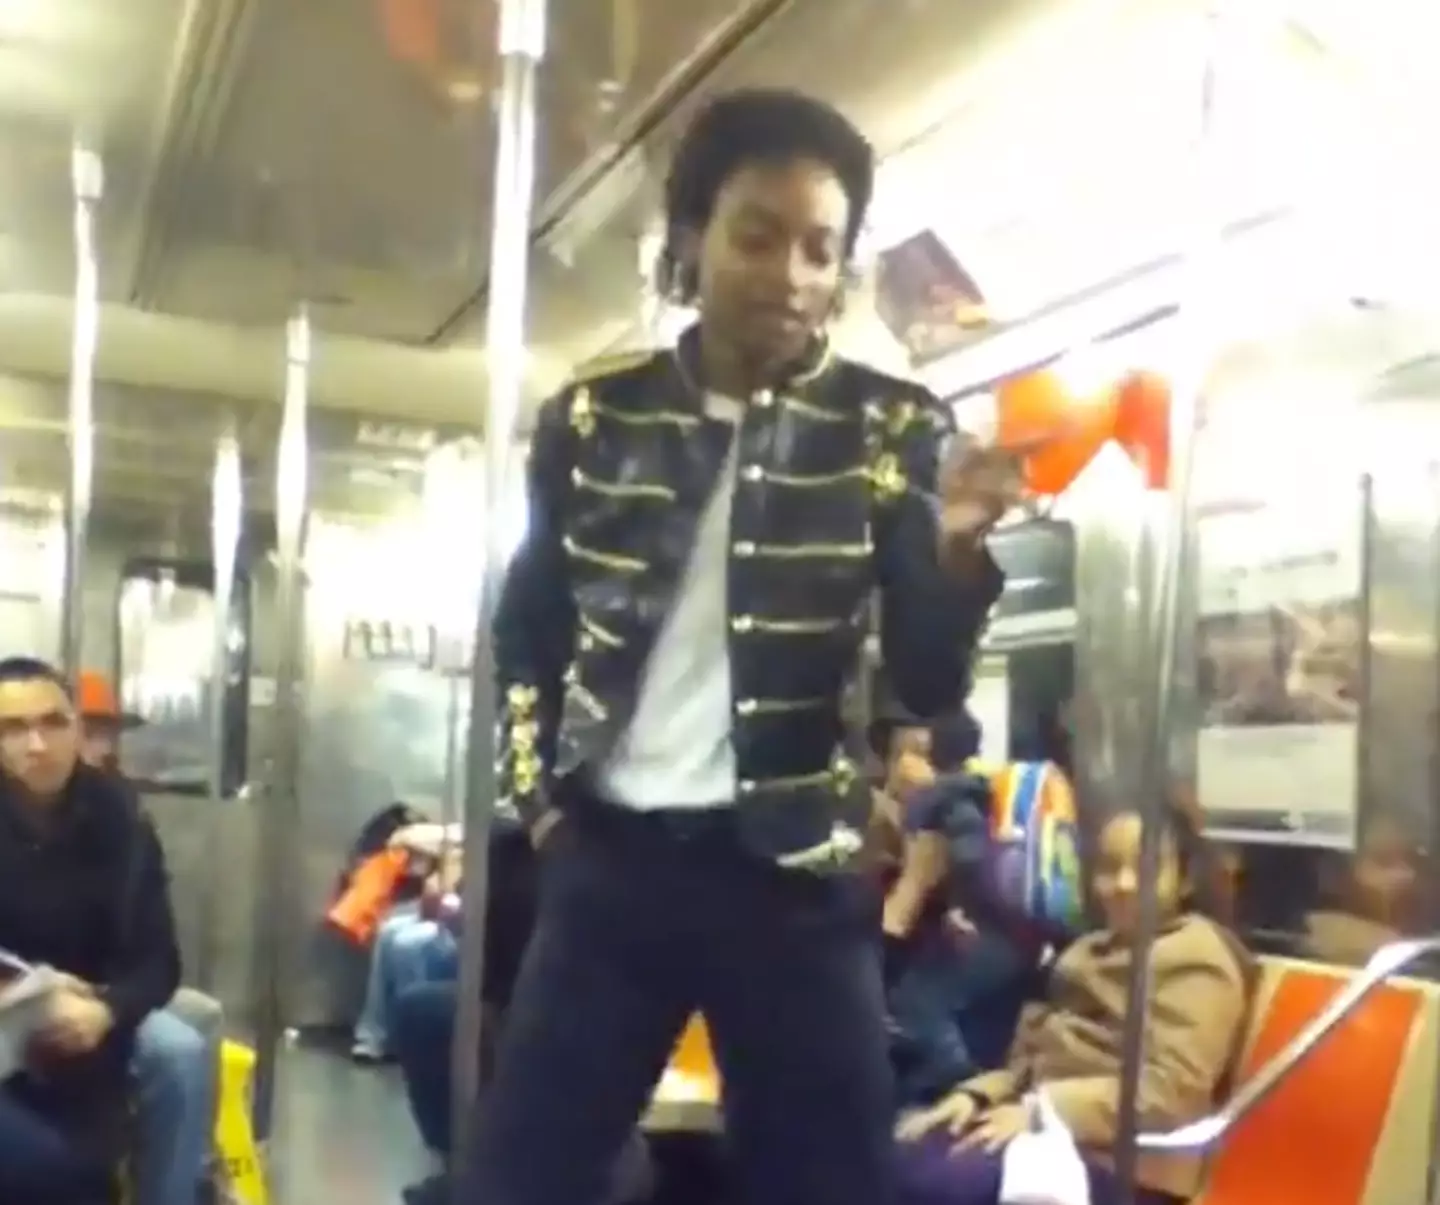 Neely was known to perform as Michael Jackson on subways.